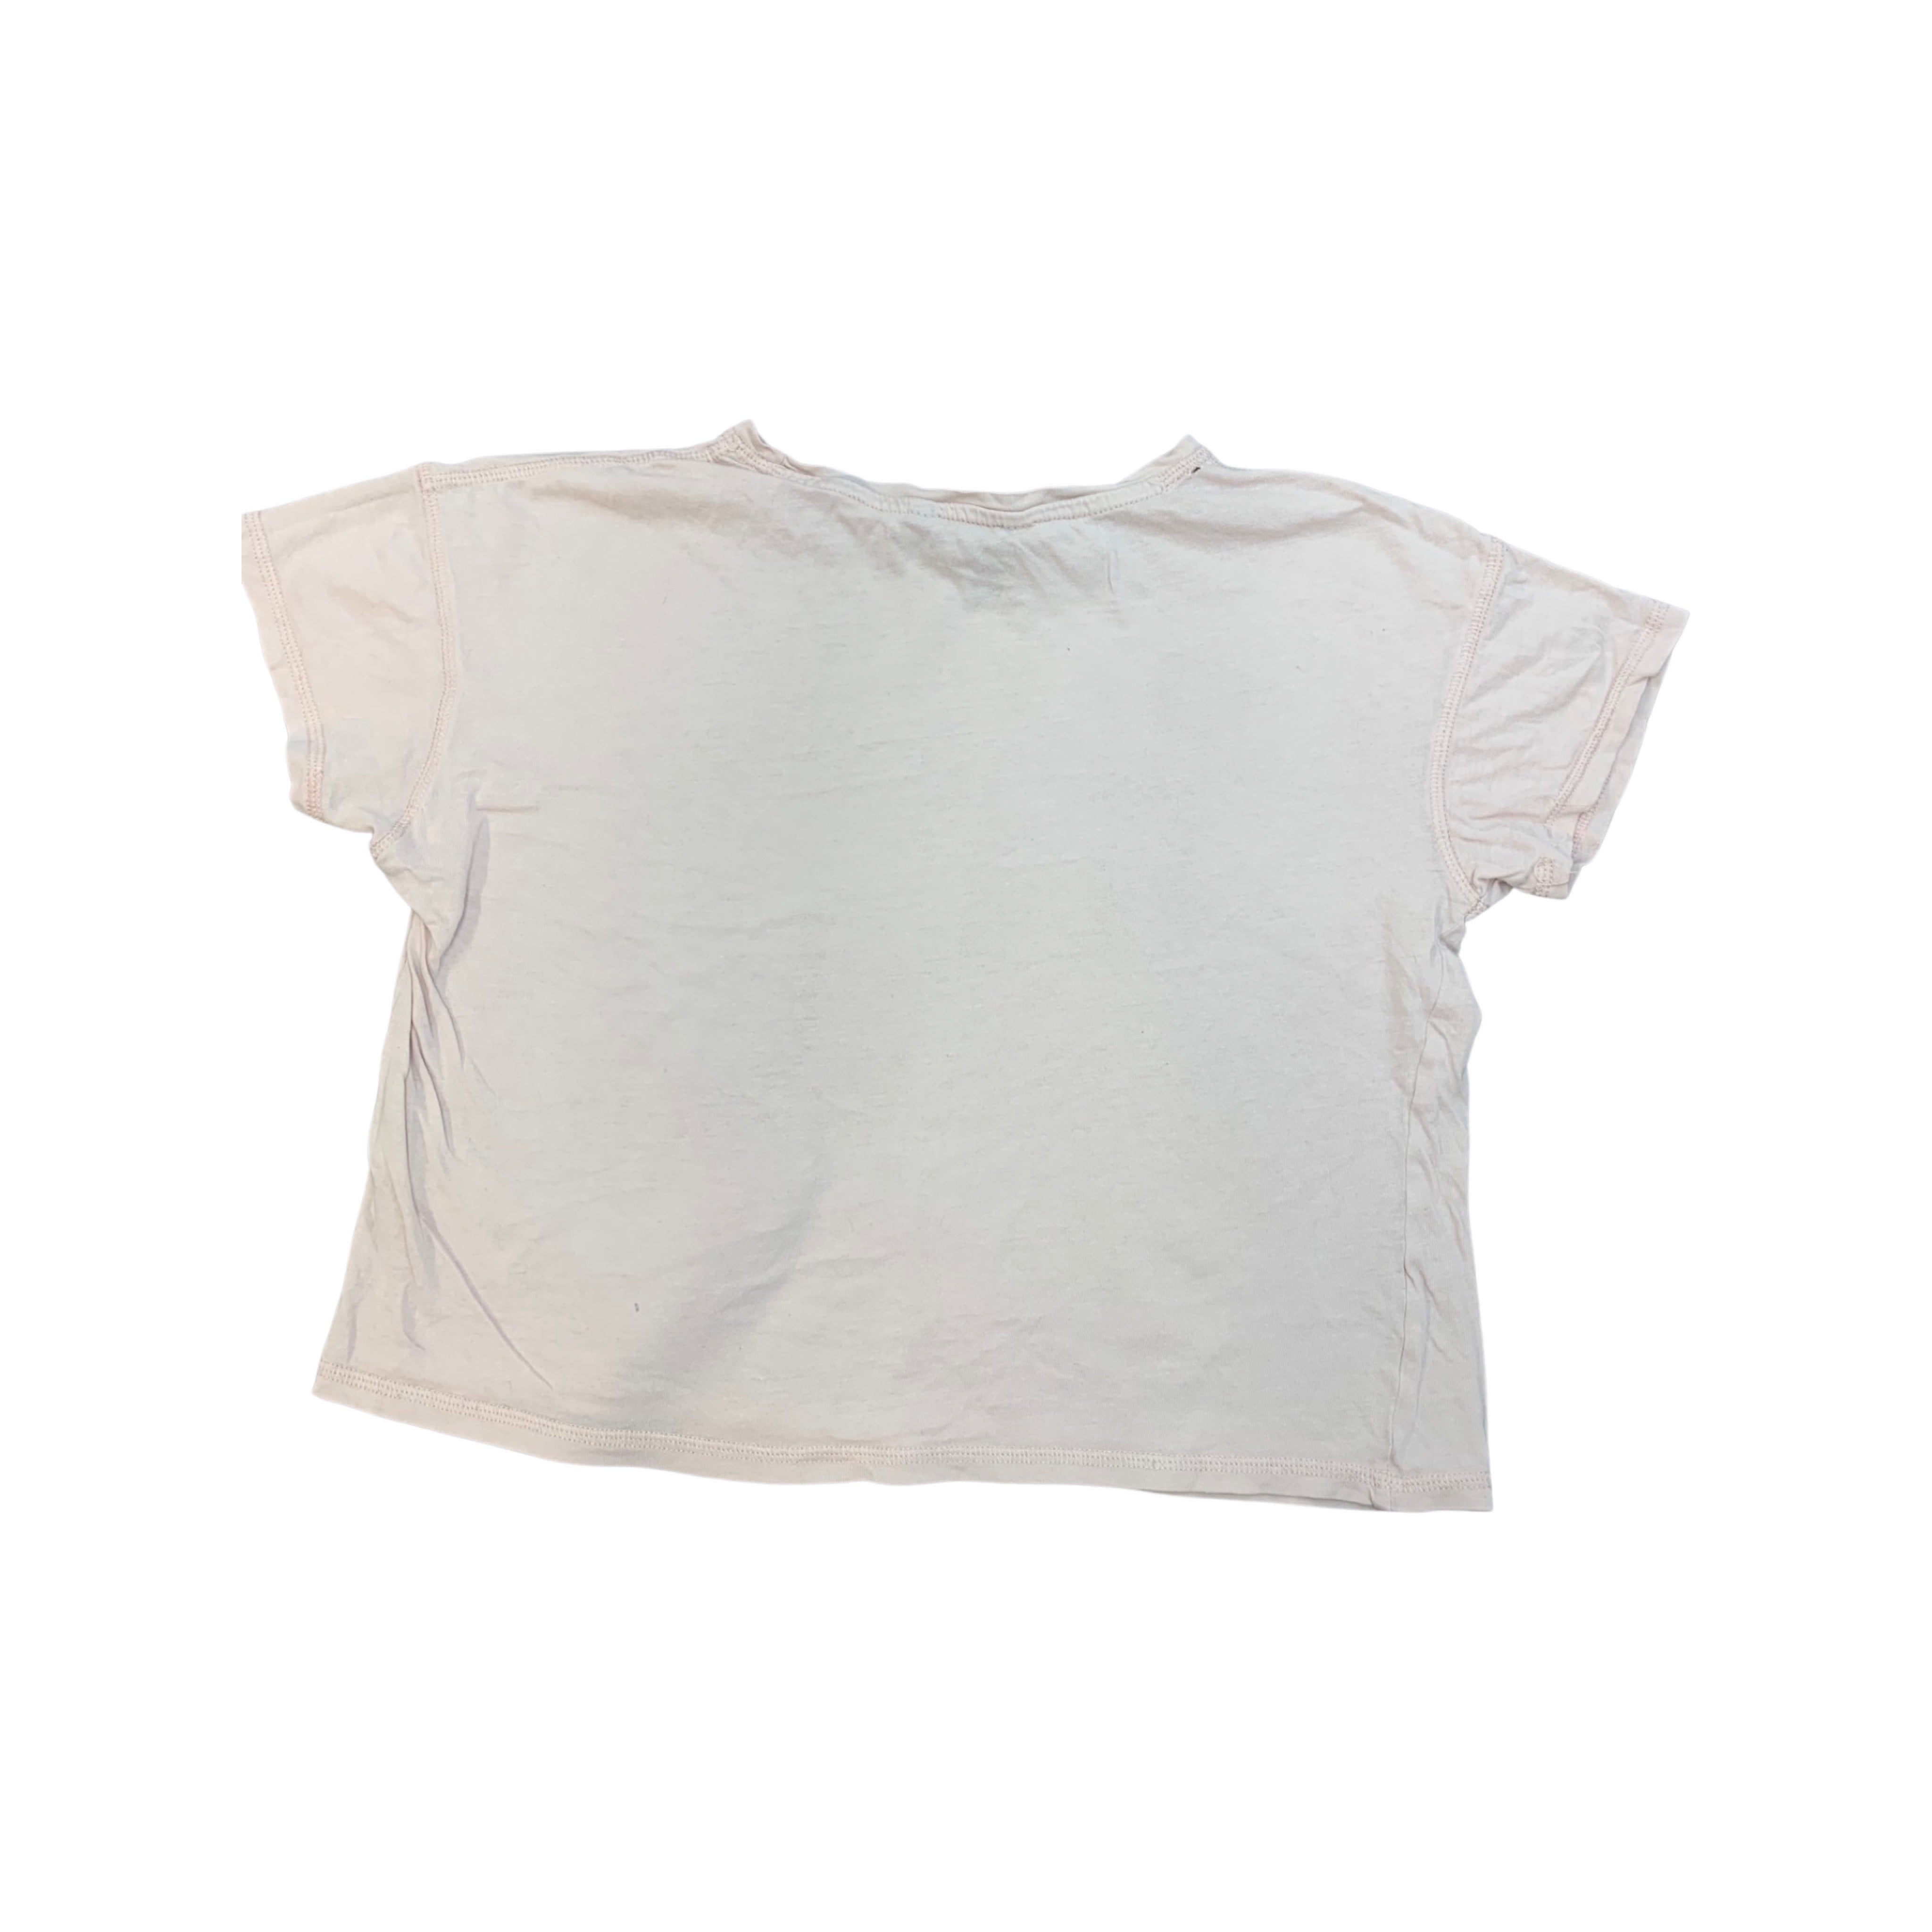 New Look Cropped T Shirt Girls 10-11 Years Playwear